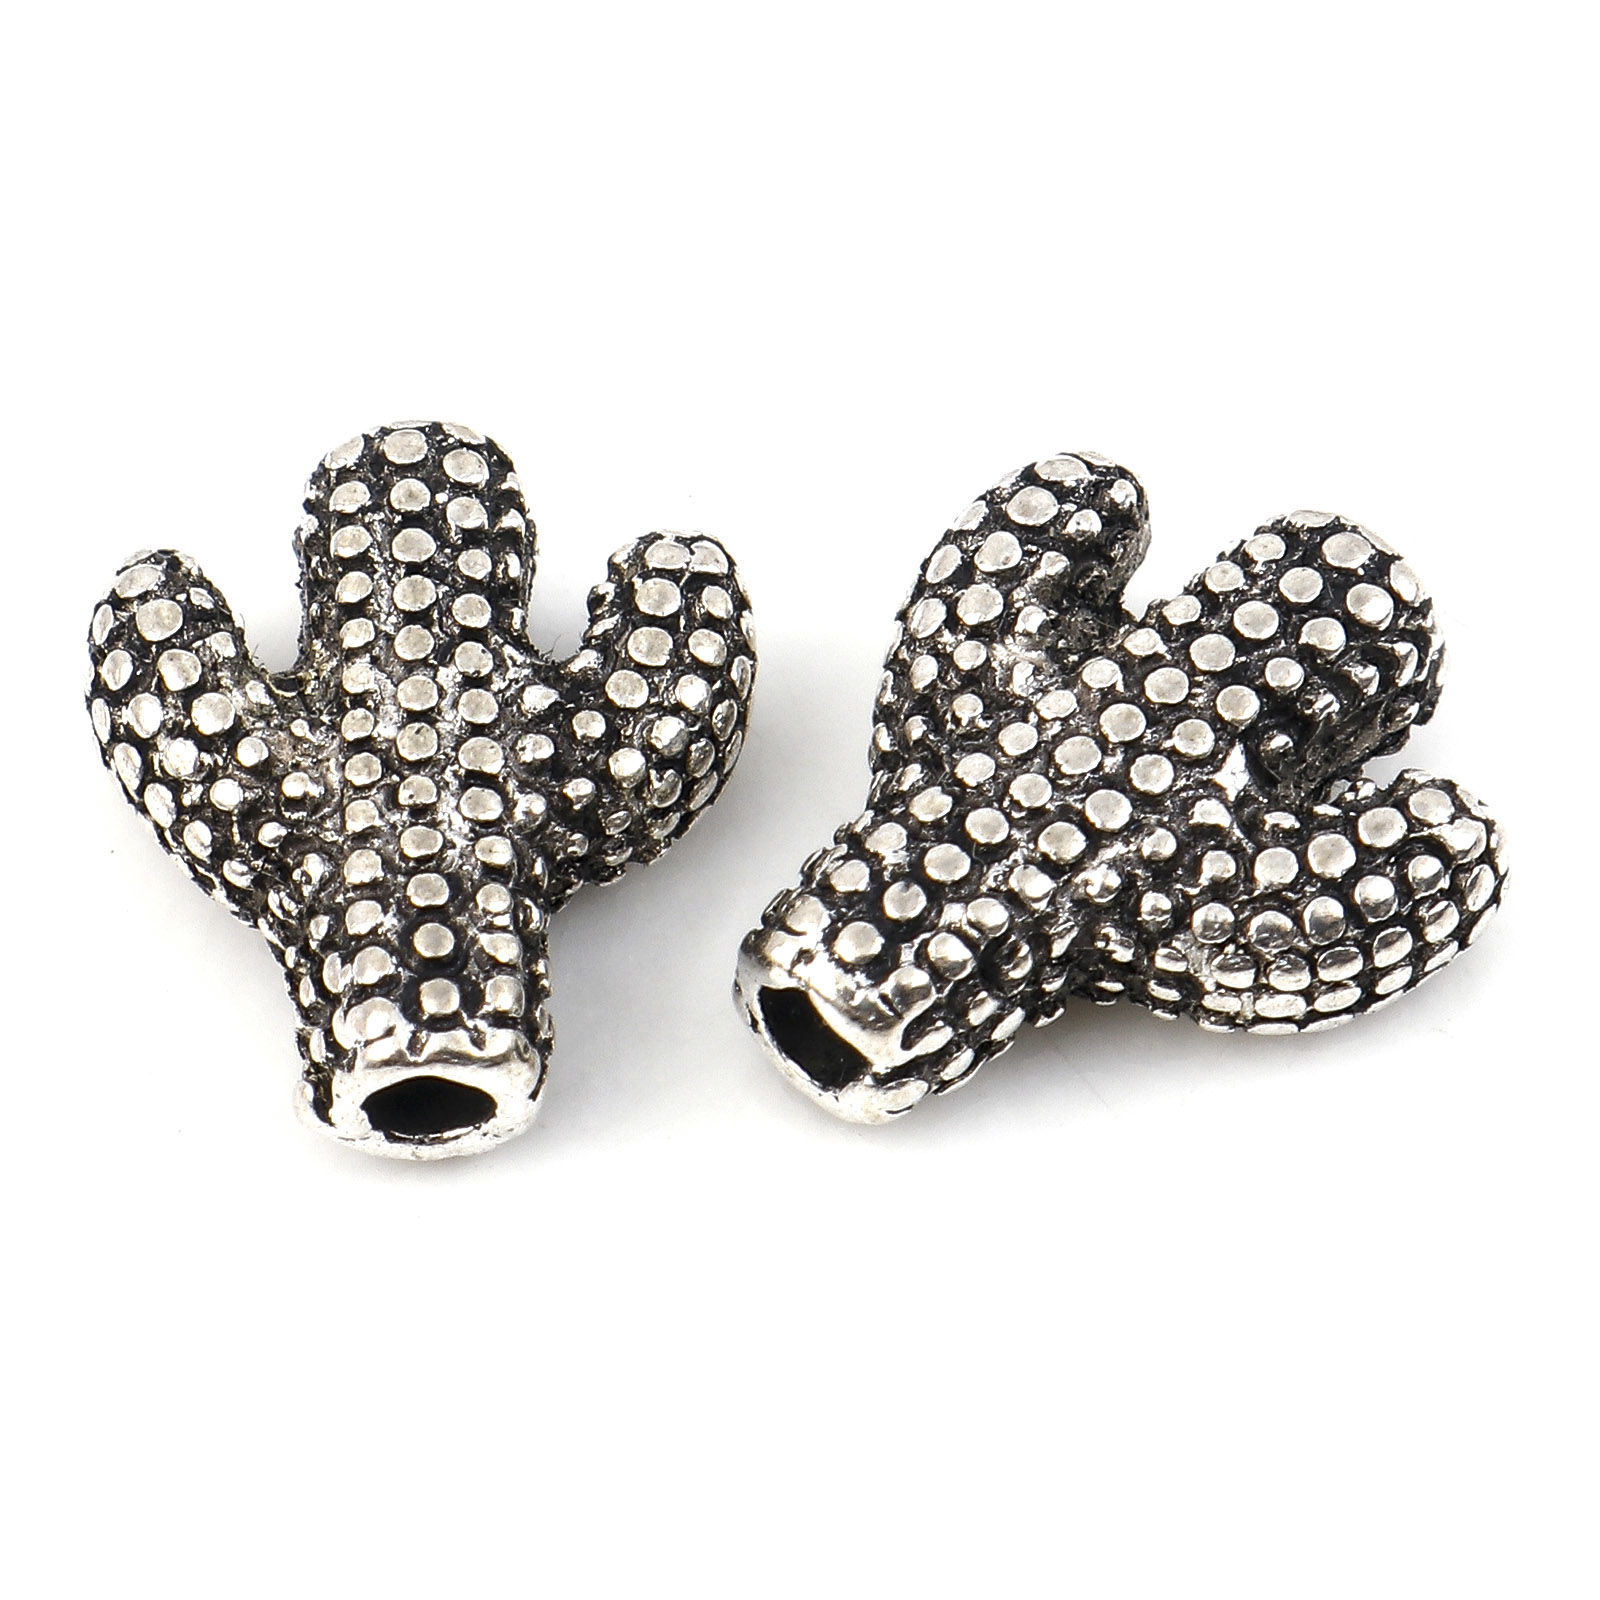 Picture of Zinc Based Alloy Flora Collection Spacer Beads Cactus Antique Silver Color About 12mm x 10mm, Hole: Approx 1.4mm, 20 PCs